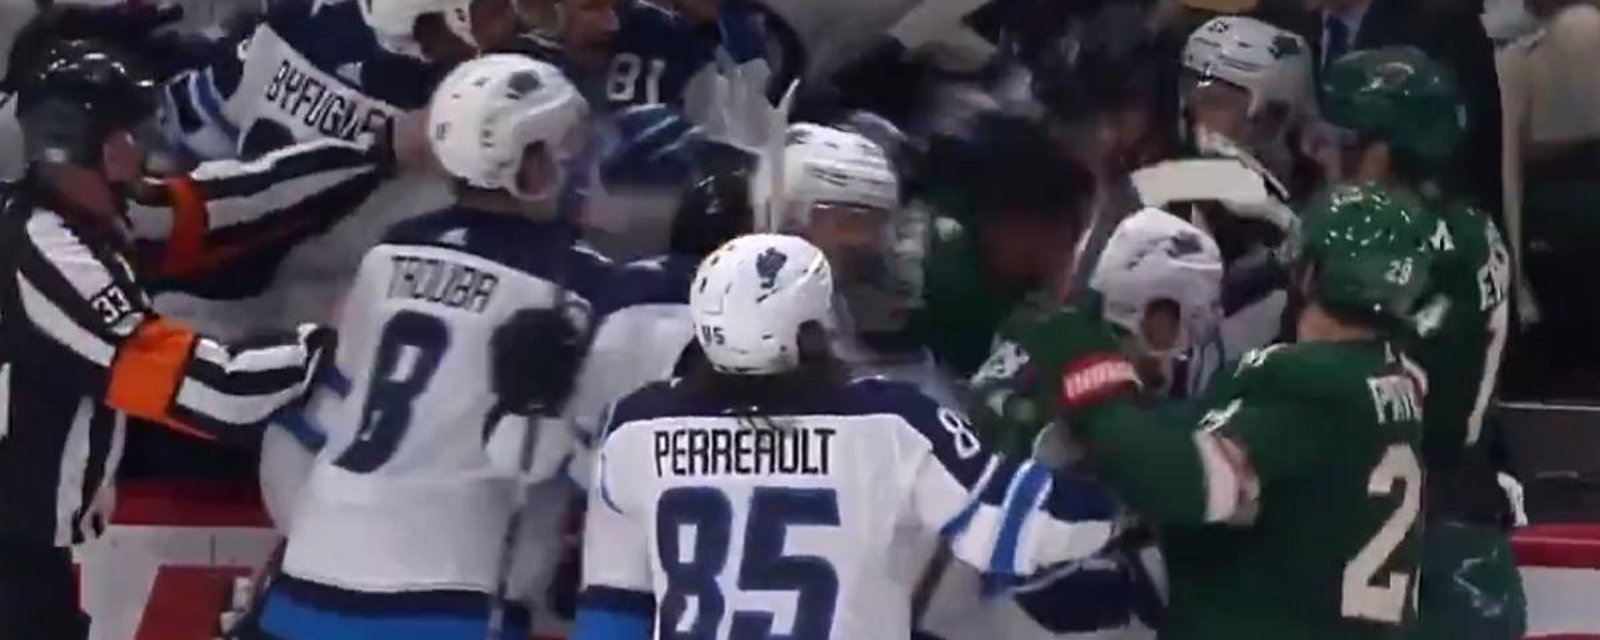 Brawl breaks out on the Jets bench after an elbow to the jaw from Lowry.